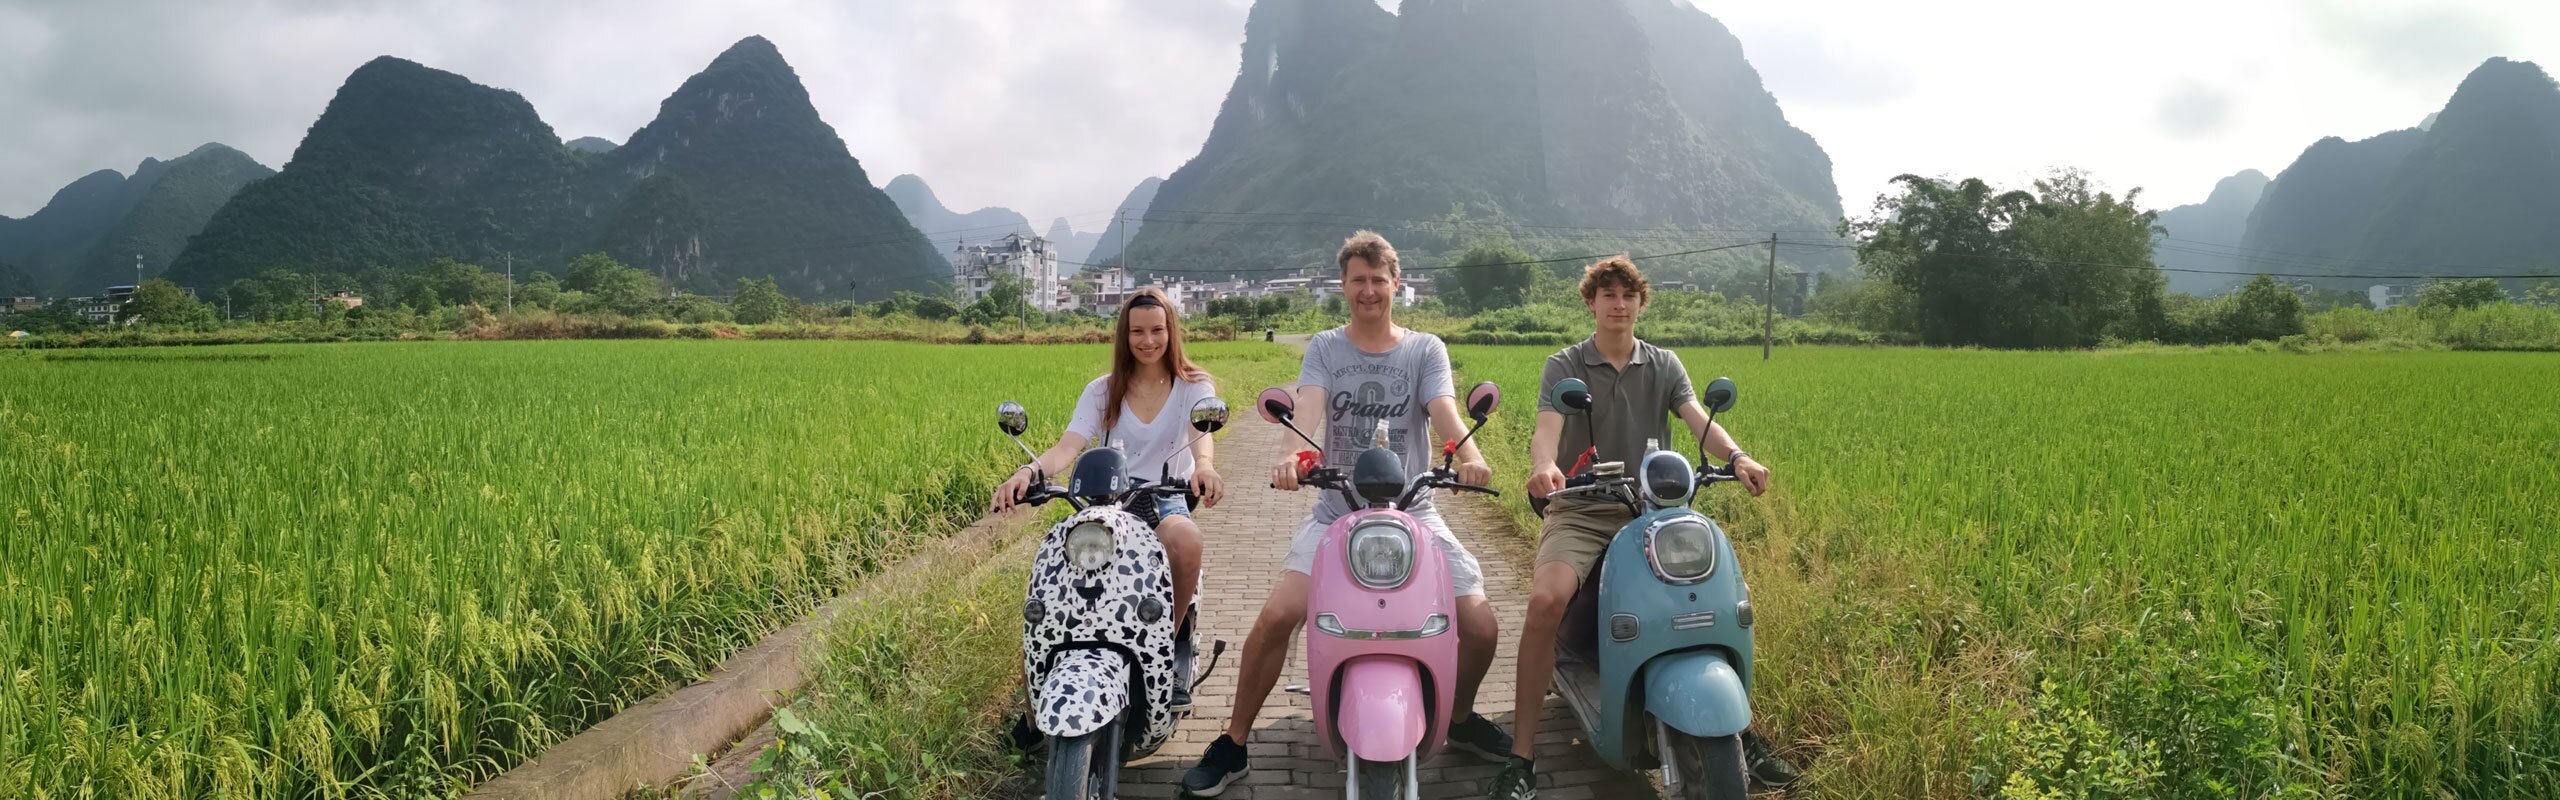 10-Day Family Tour to Beijing, Guilin, and Hong Kong